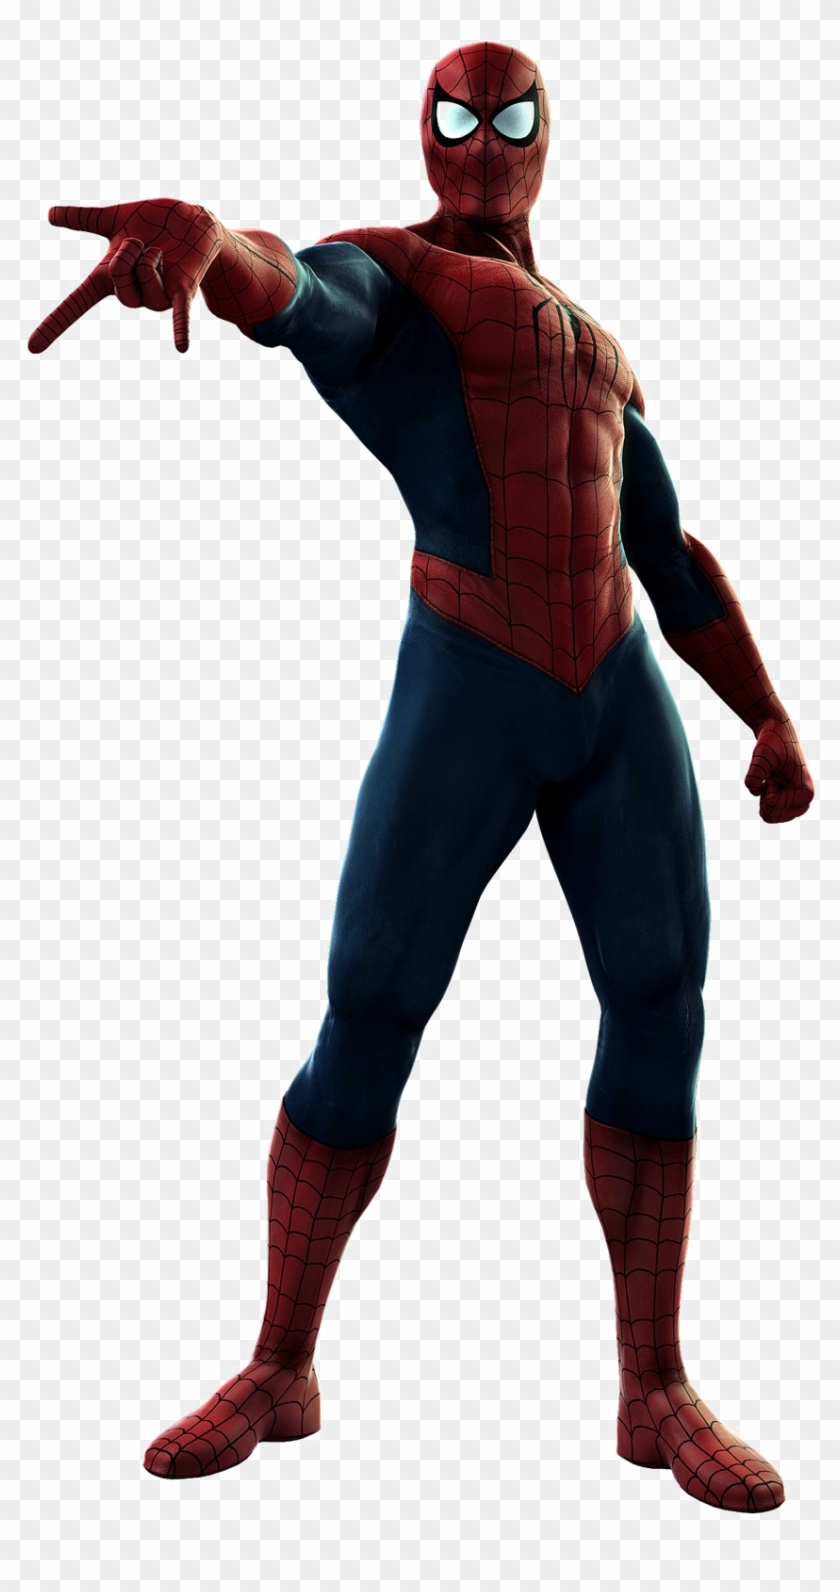 Spider-man Standing Png Image With Transparent Background - Spiderman Marvel Ultimate Alliance Clipart #1740955